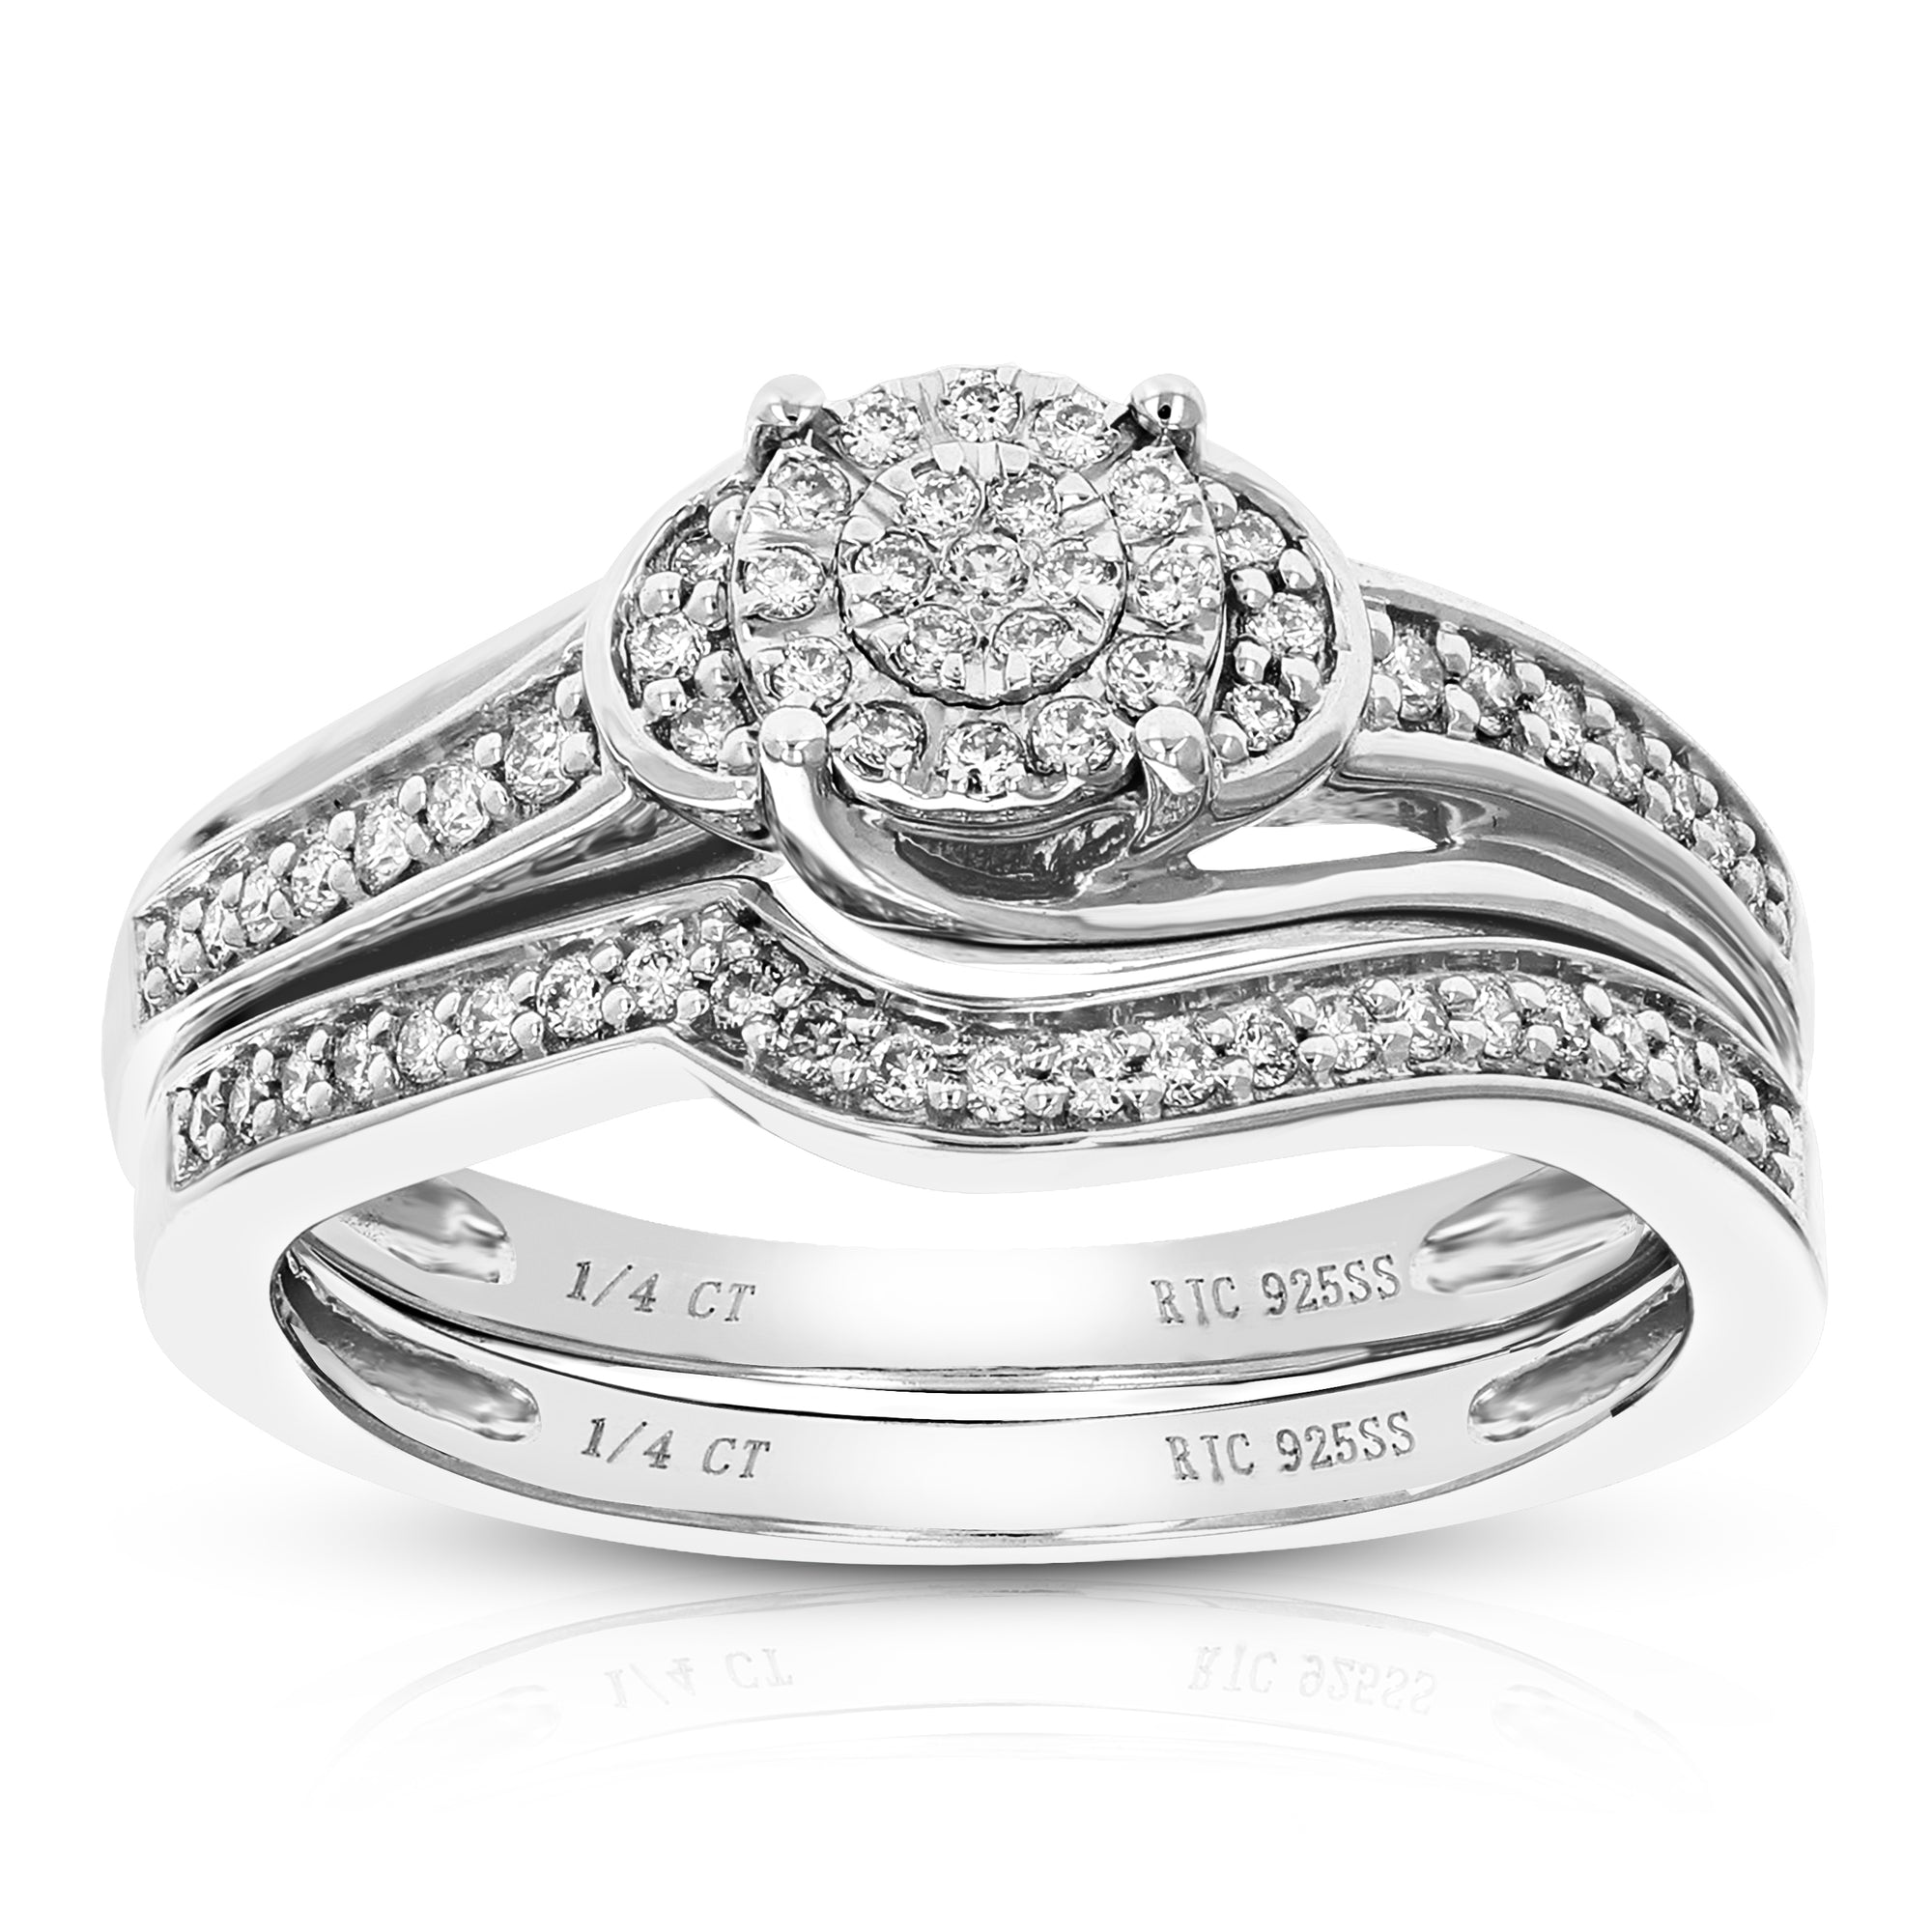 1/4 cttw Wedding Engagement Ring Bridal Set, Round Lab Grown Diamond Ring for Women in .925 Sterling Silver, Prong Setting, Size 6-8